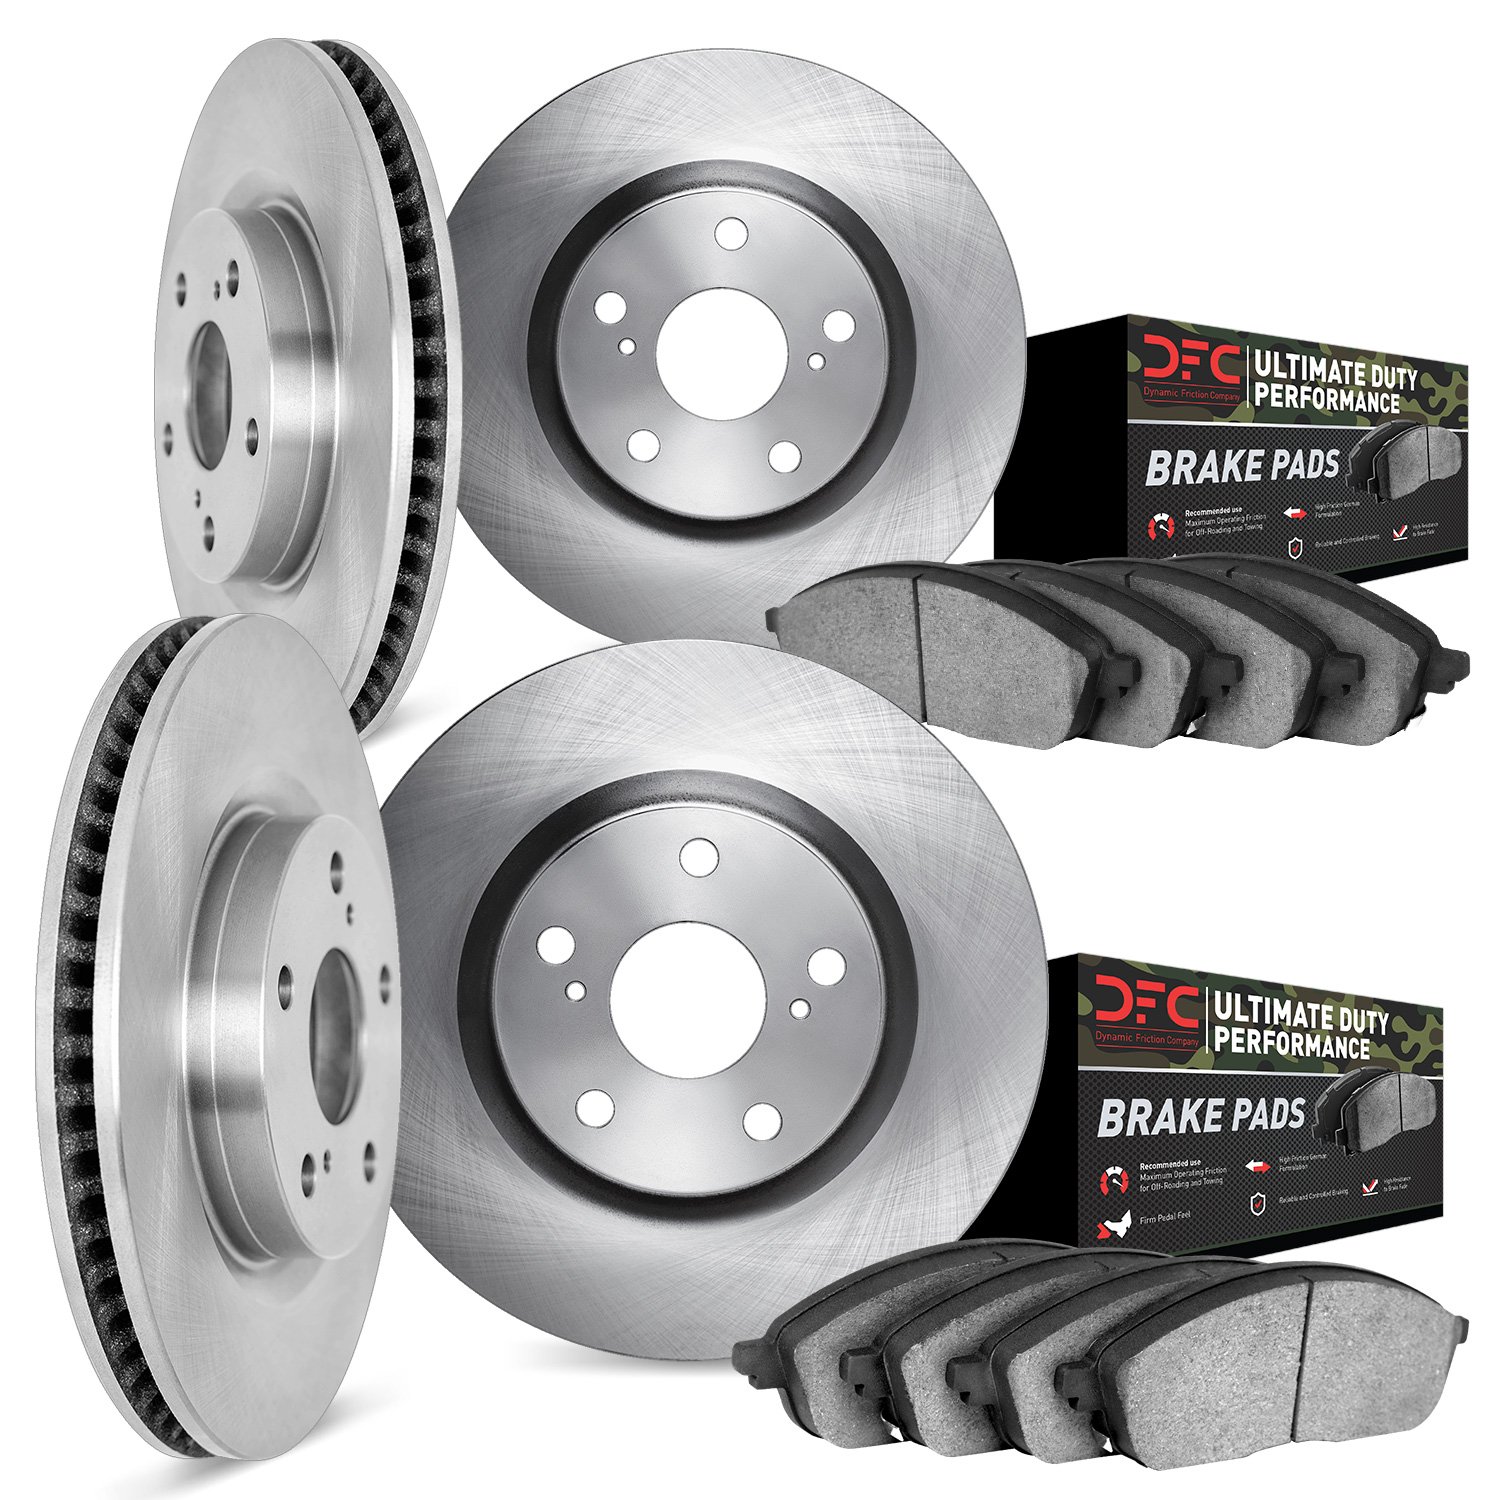 6404-76018 Brake Rotors with Ultimate-Duty Brake Pads, Fits Select Lexus/Toyota/Scion, Position: Front and Rear